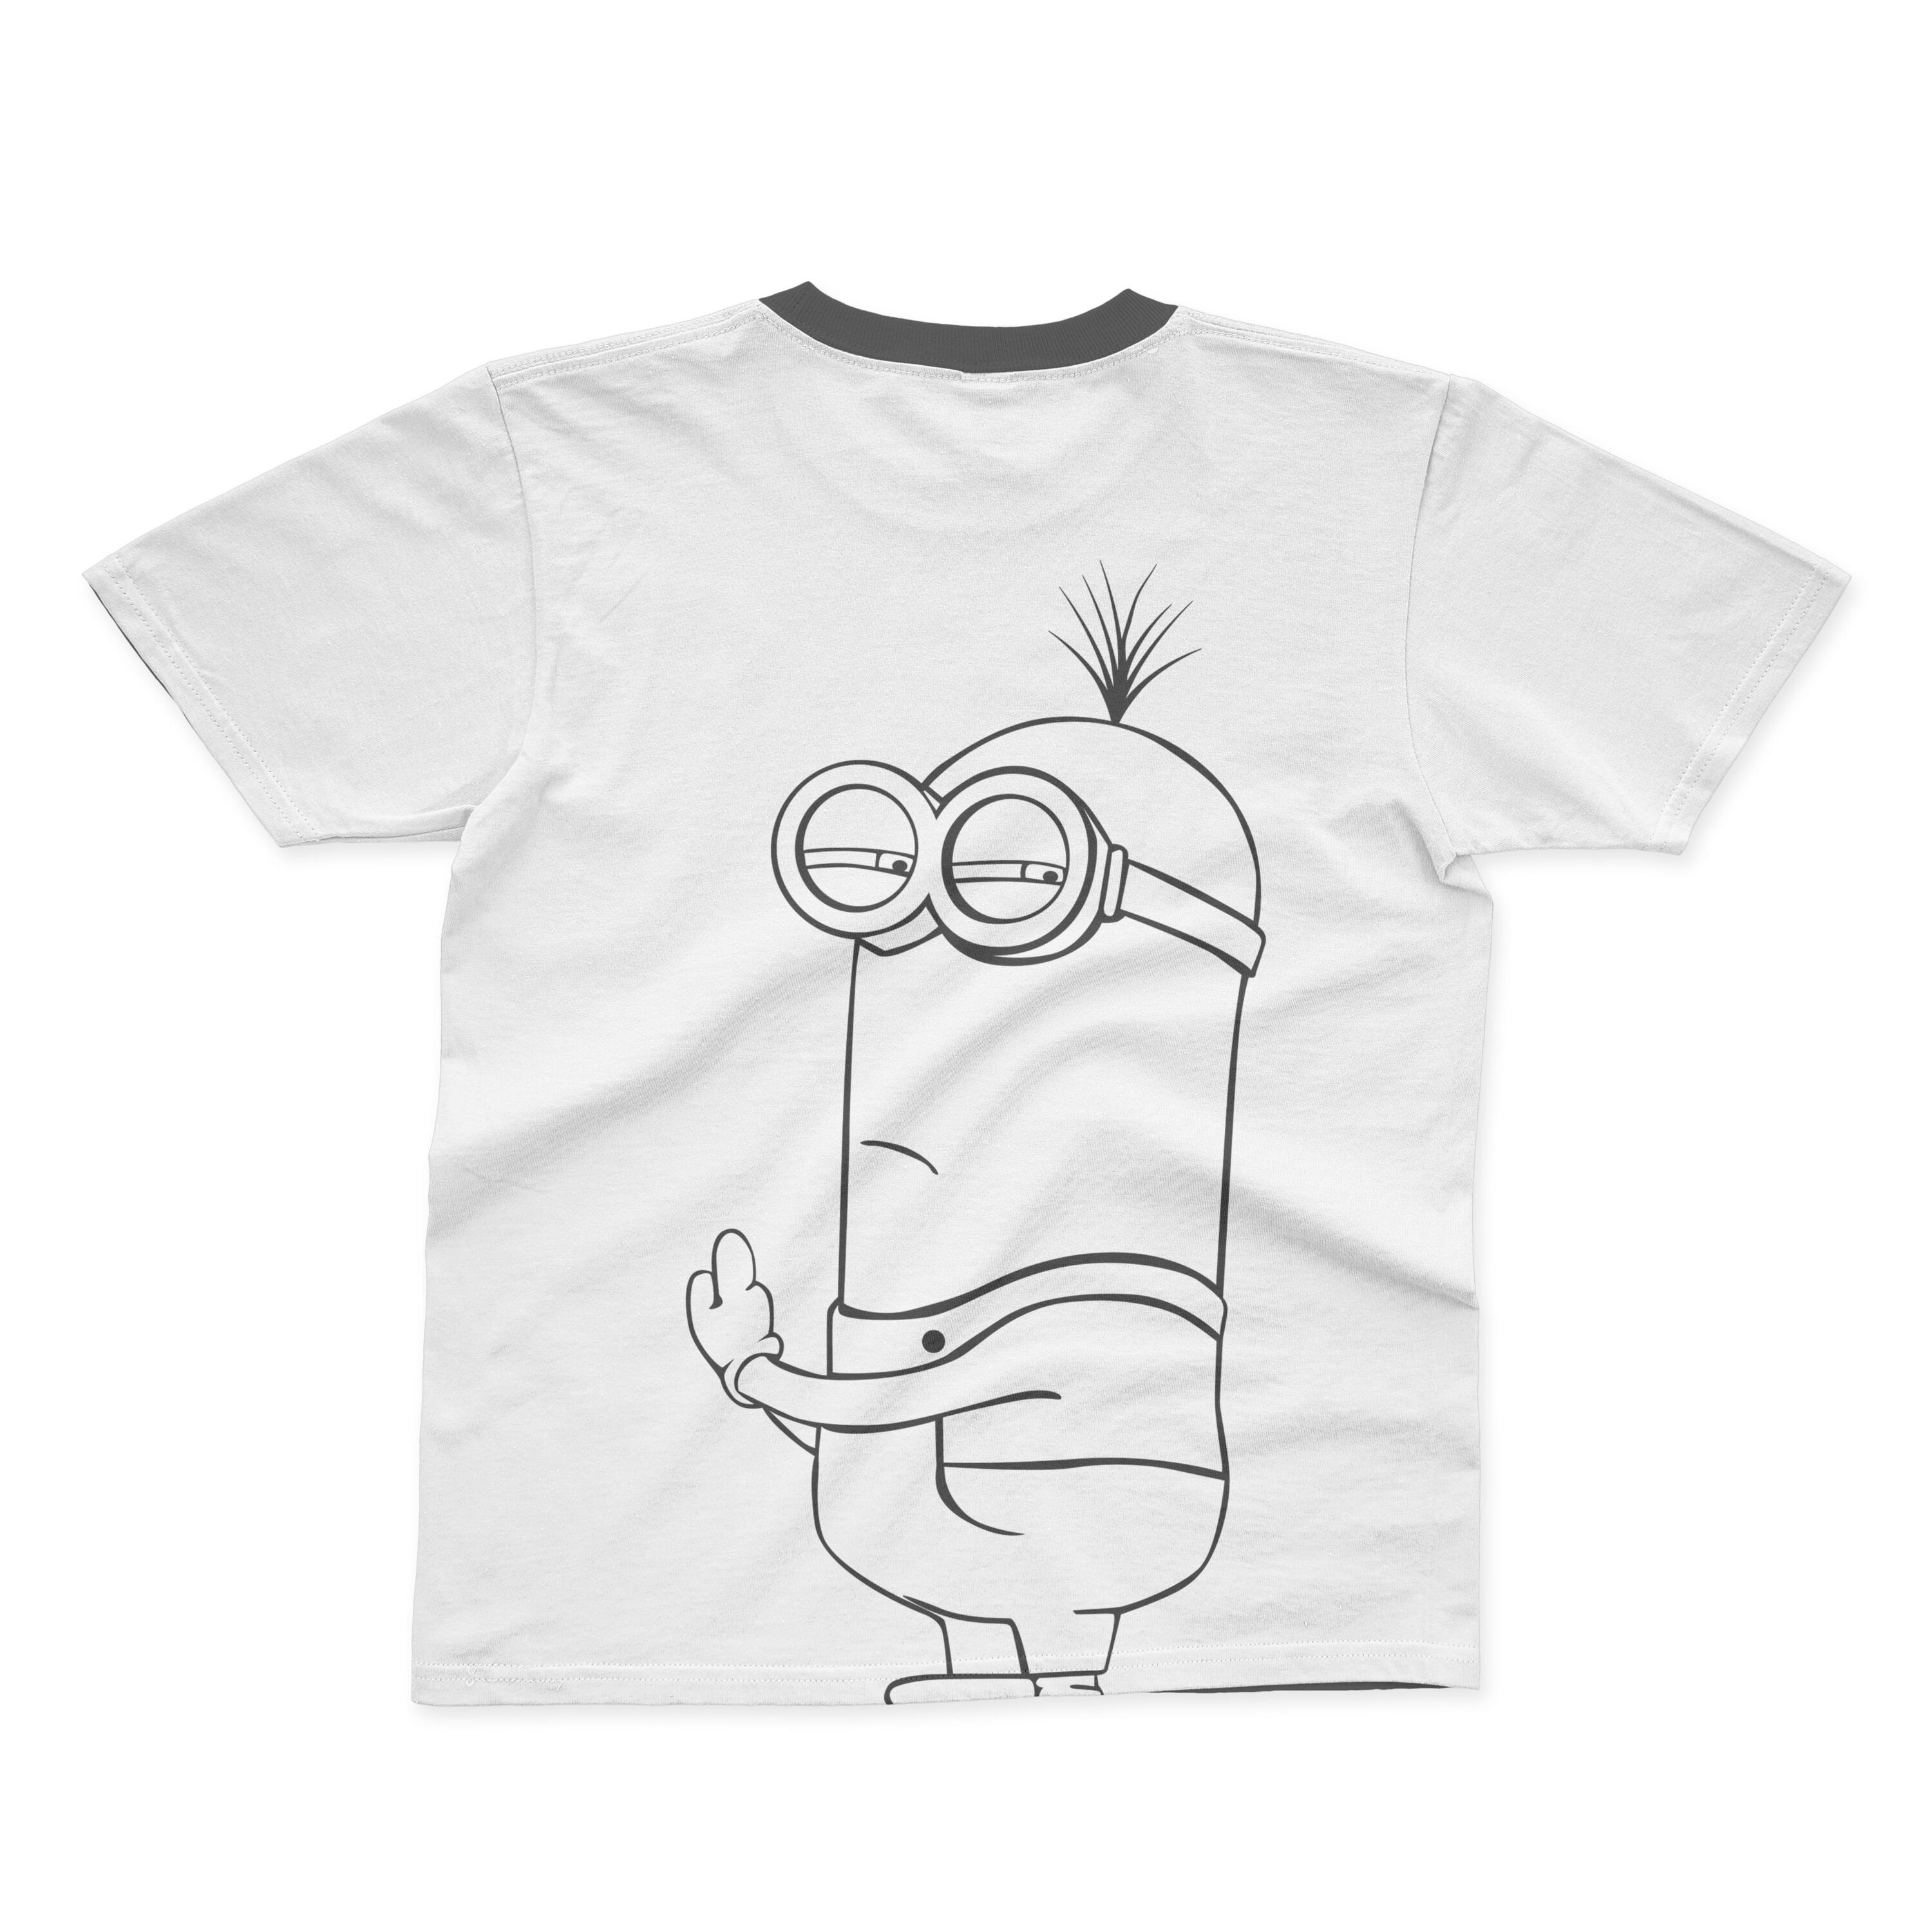 A white T-shirt with a black collar and offended minion outline.